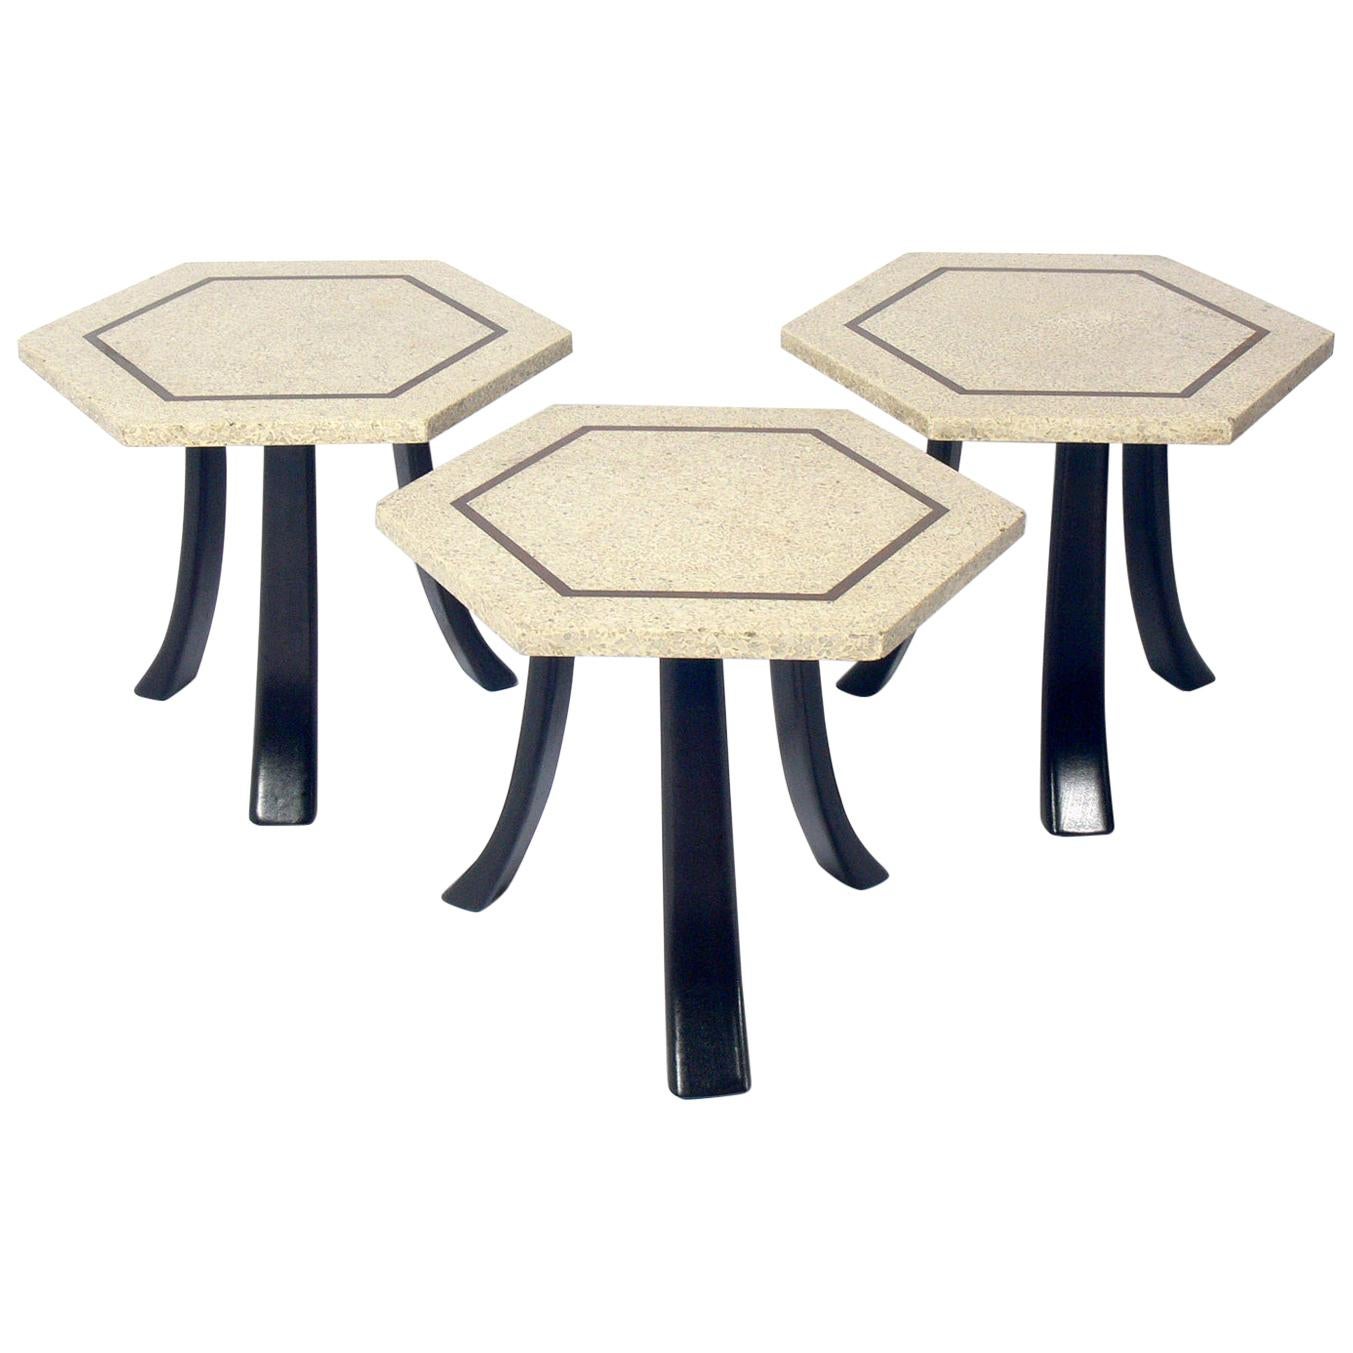 Selection of Harvey Probber Hex Tables